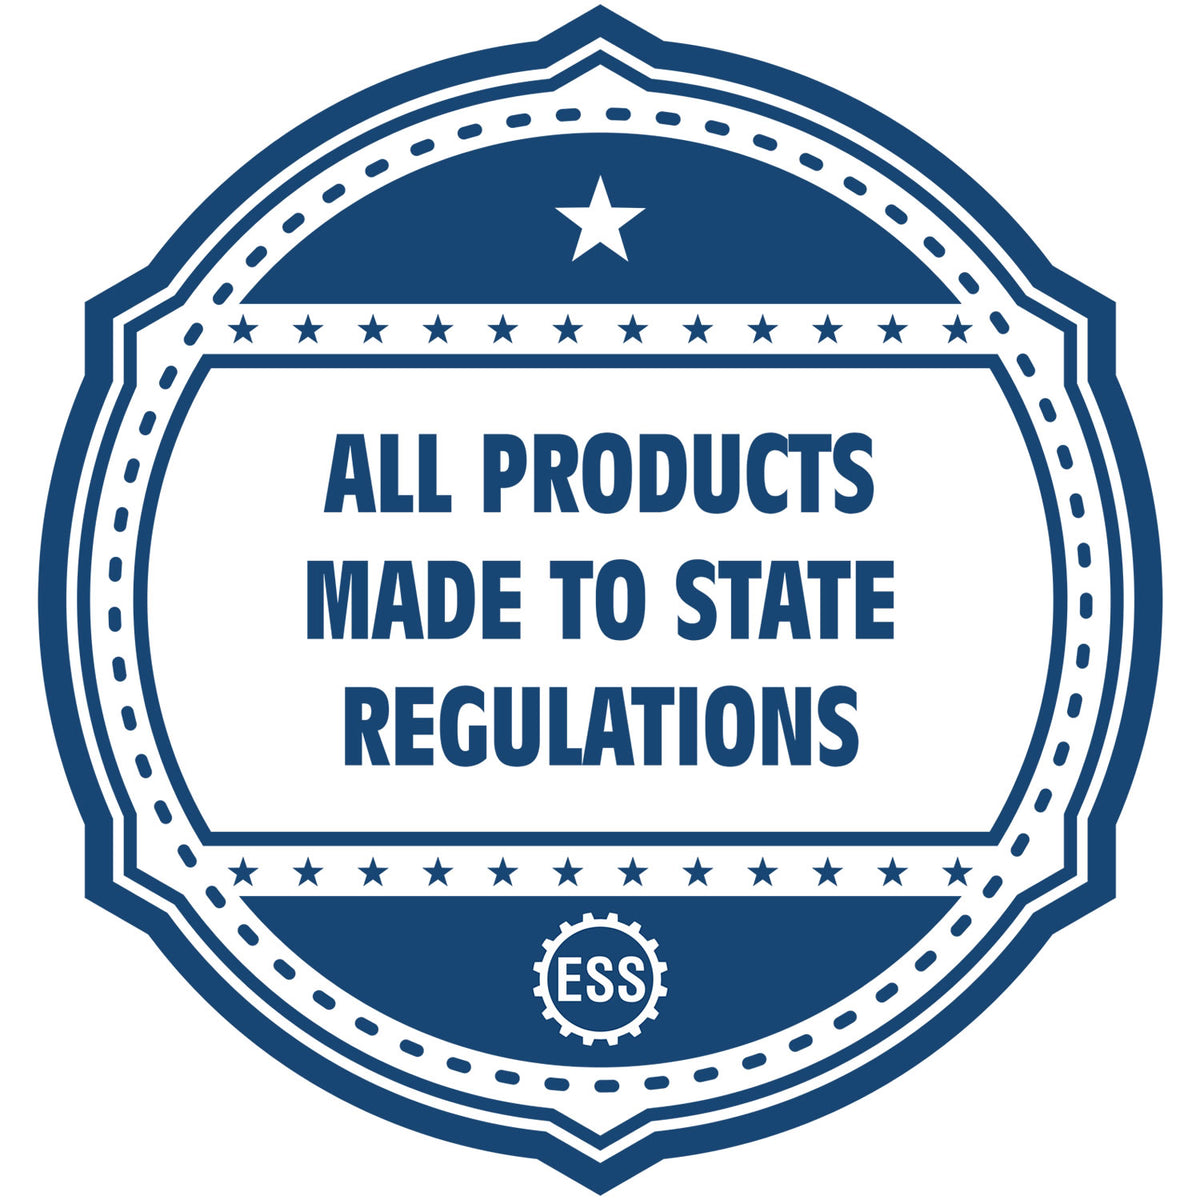 An icon or badge element for the State of New Jersey Architectural Seal Embosser showing that this product is made in compliance with state regulations.